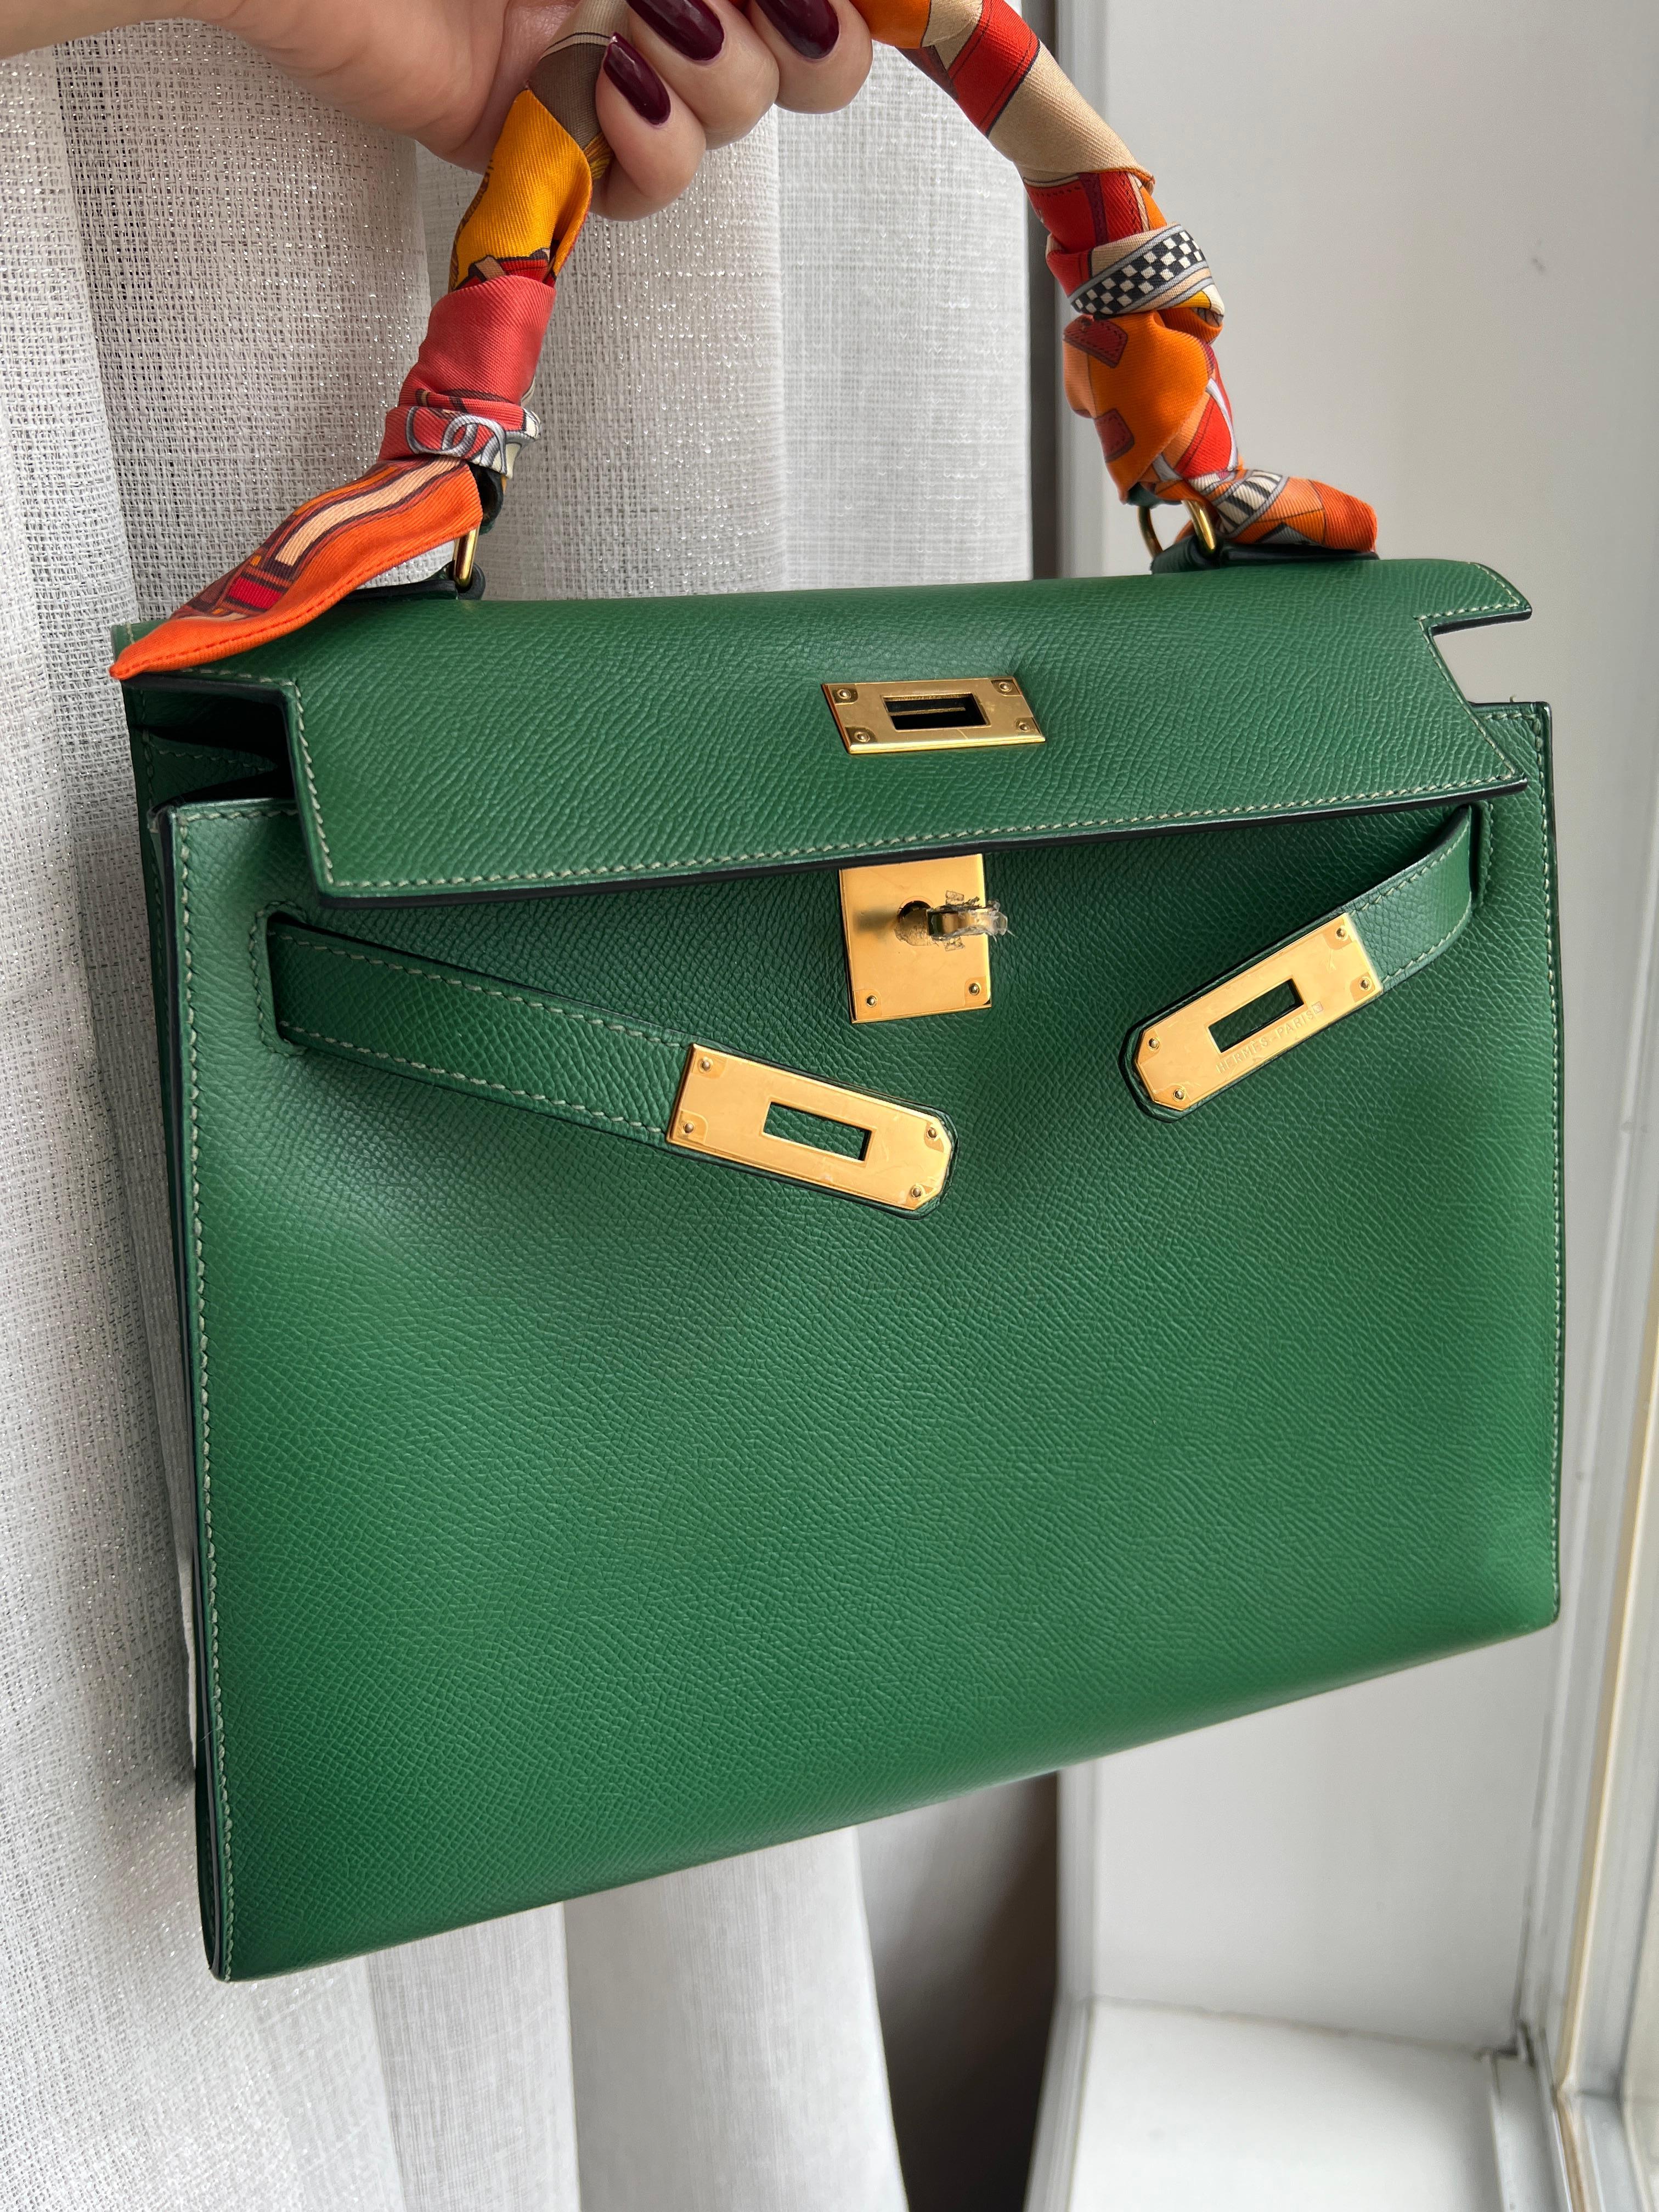 Hermes Kelly 28 Cactus Sellier Bag with GHW. Epsom leather.
Y stamp. Vintage piece in great condition. 
Minor wear on the corners and minor scratches on hardware.
Comes with dust bag, long strap,locker,keys , rubber feet protectors and locker. 